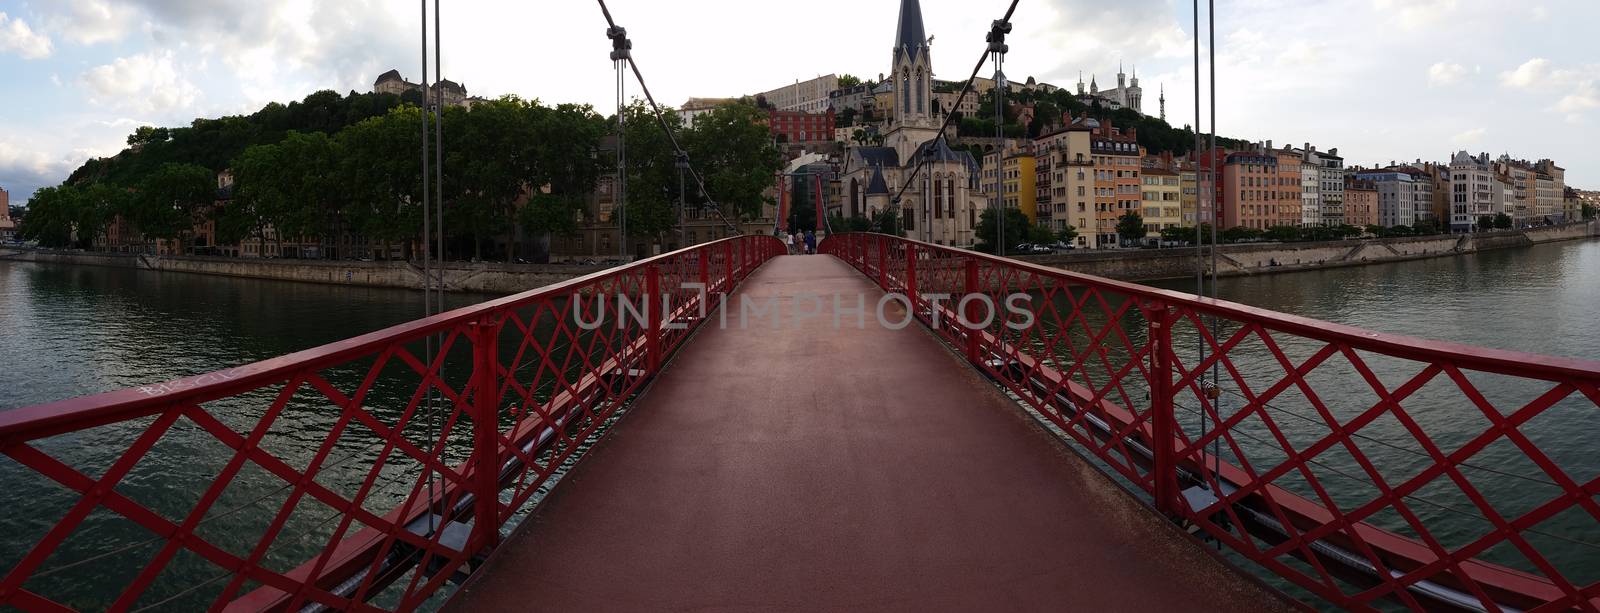 Lyon Fourviere. Panoramic view from the Bridge by bensib